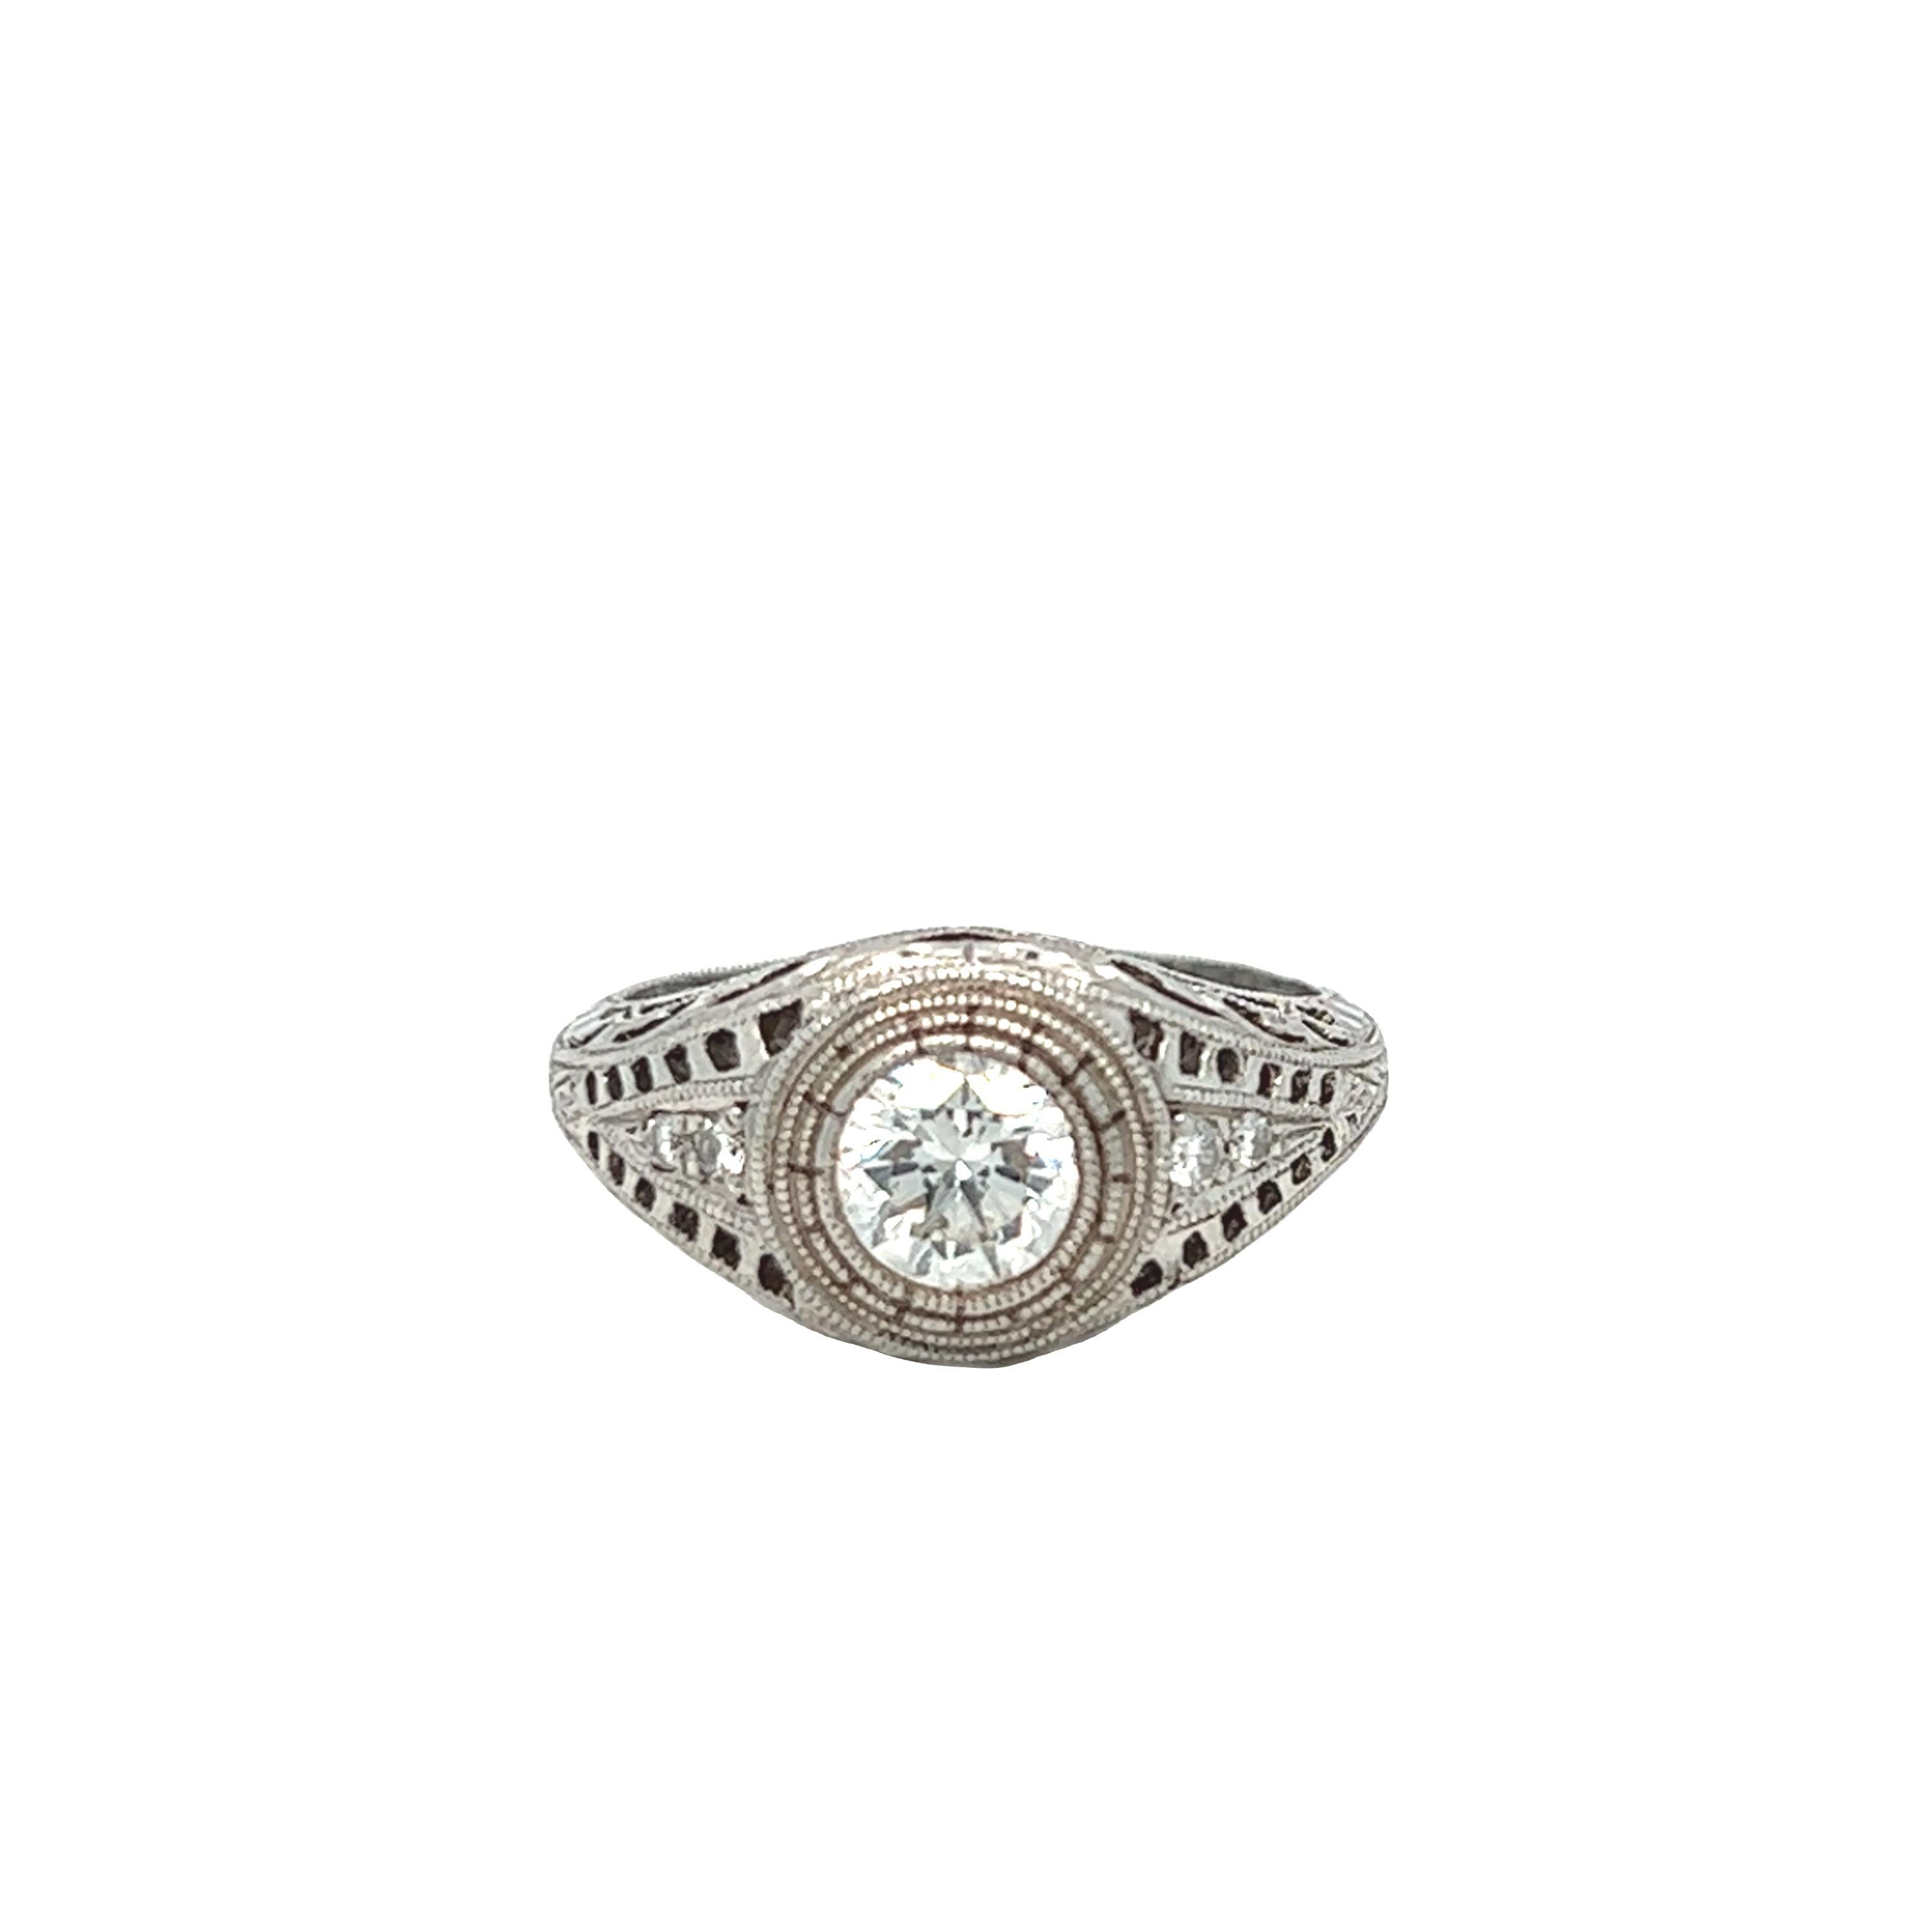 This platinum ring has a gorgeous cut out work and beautiful flowing filigree pattern all around the ring. The center stone is a round cut 0.85 ct with G color and SI clarity. The unique design wraps around 4 accent diamonds about 0.10 carat total.